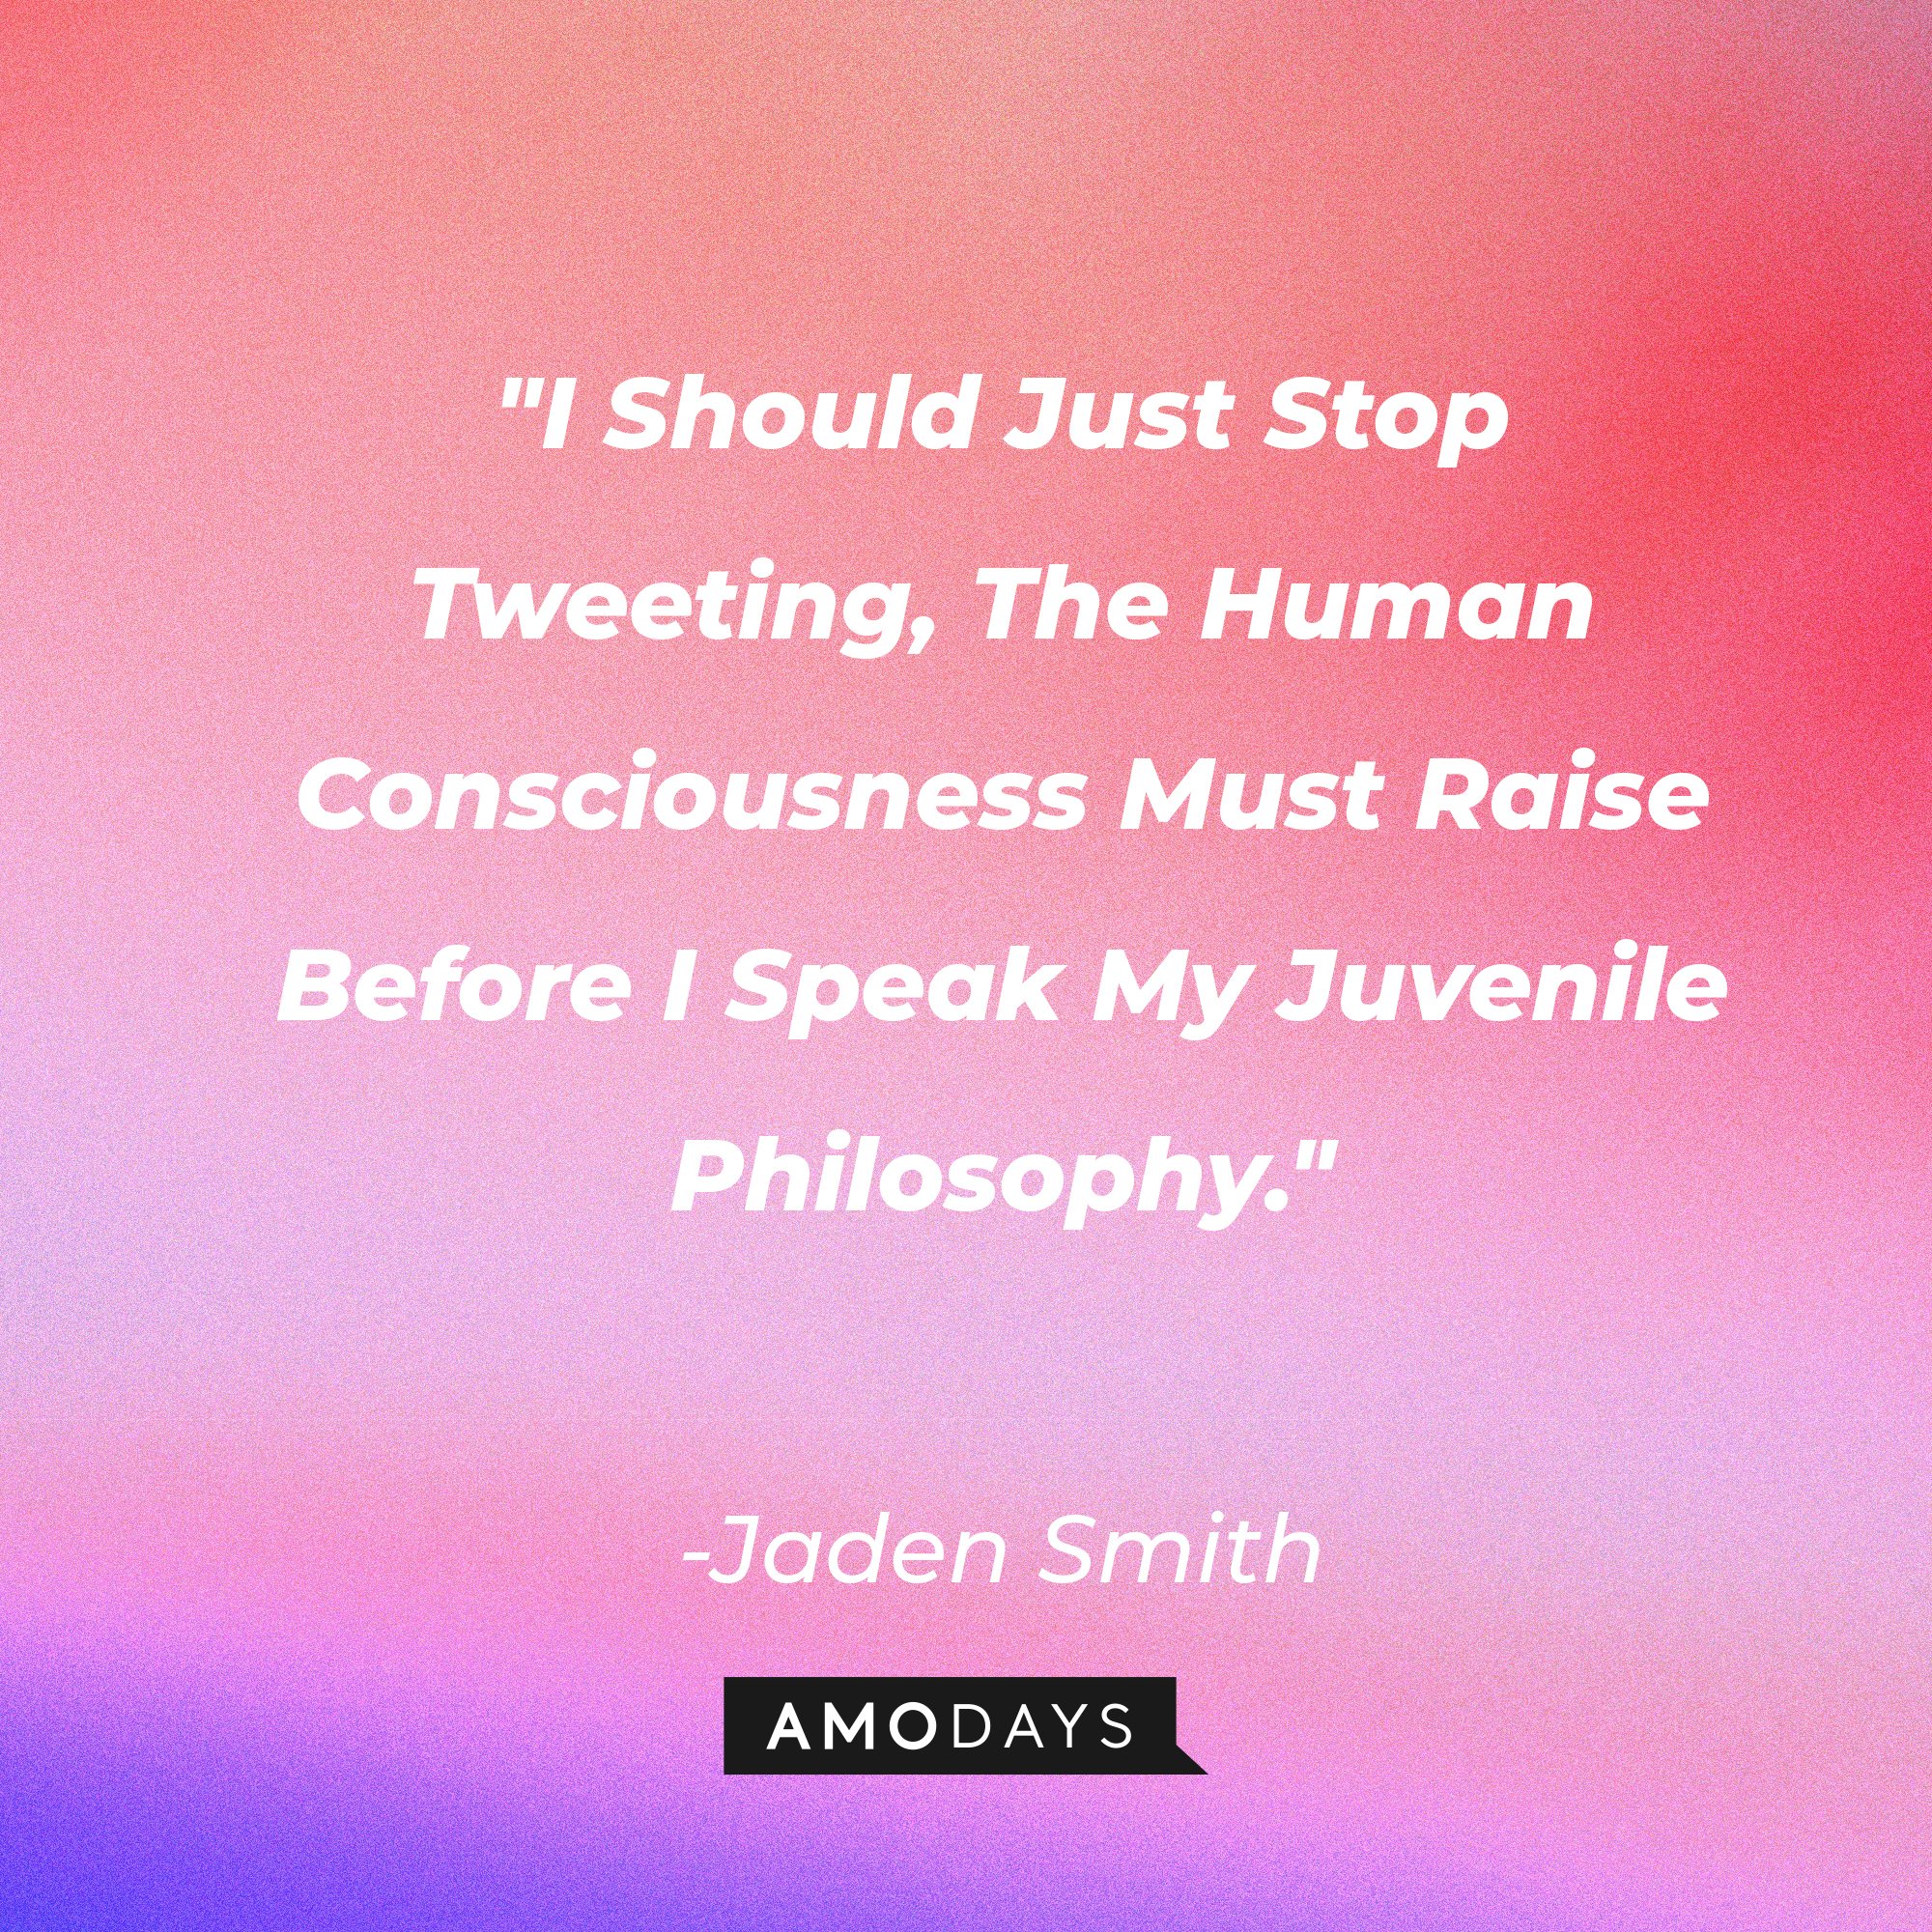 Jaden Smith's quote: "I Should Just Stop Tweeting, The Human Consciousness Must Raise Before I Speak My Juvenile Philosophy." | Image: AmoDays